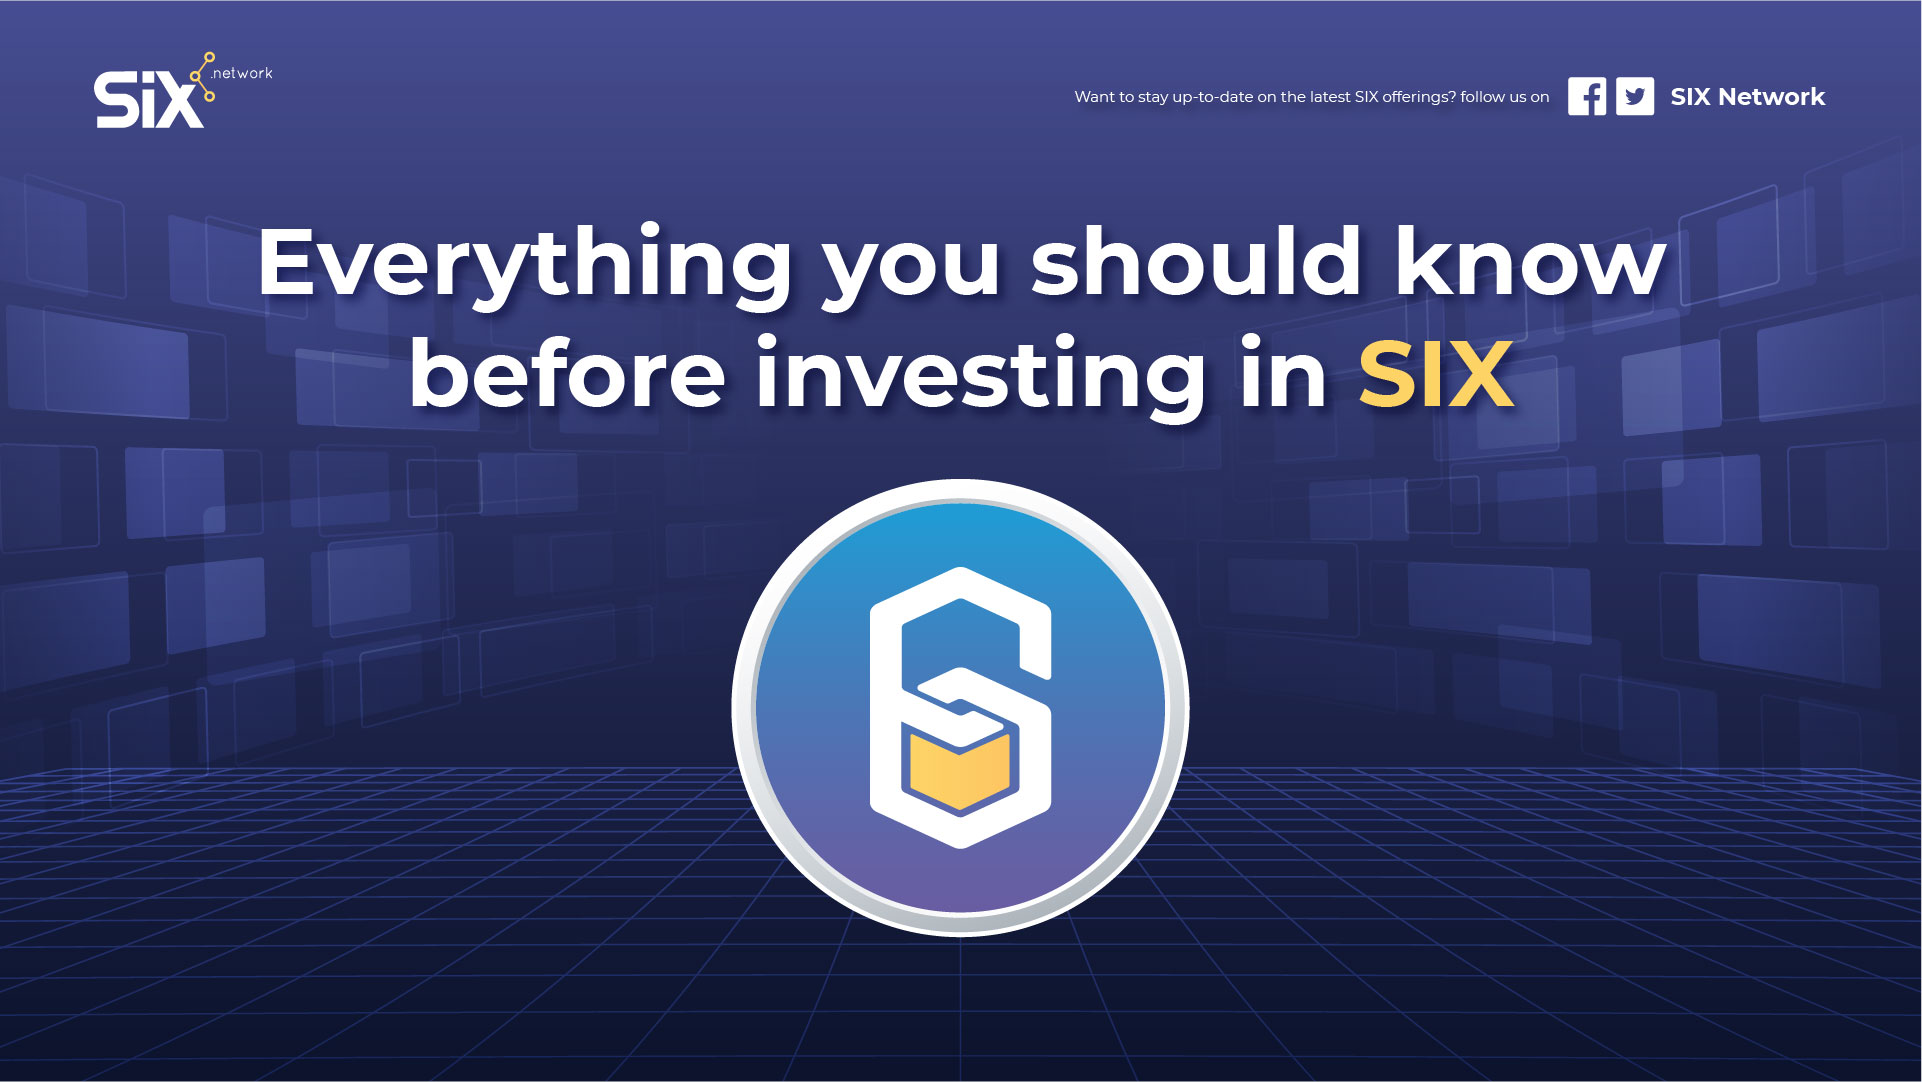 ‘Everything you should know before investing in SIX’ – SIX Network 101